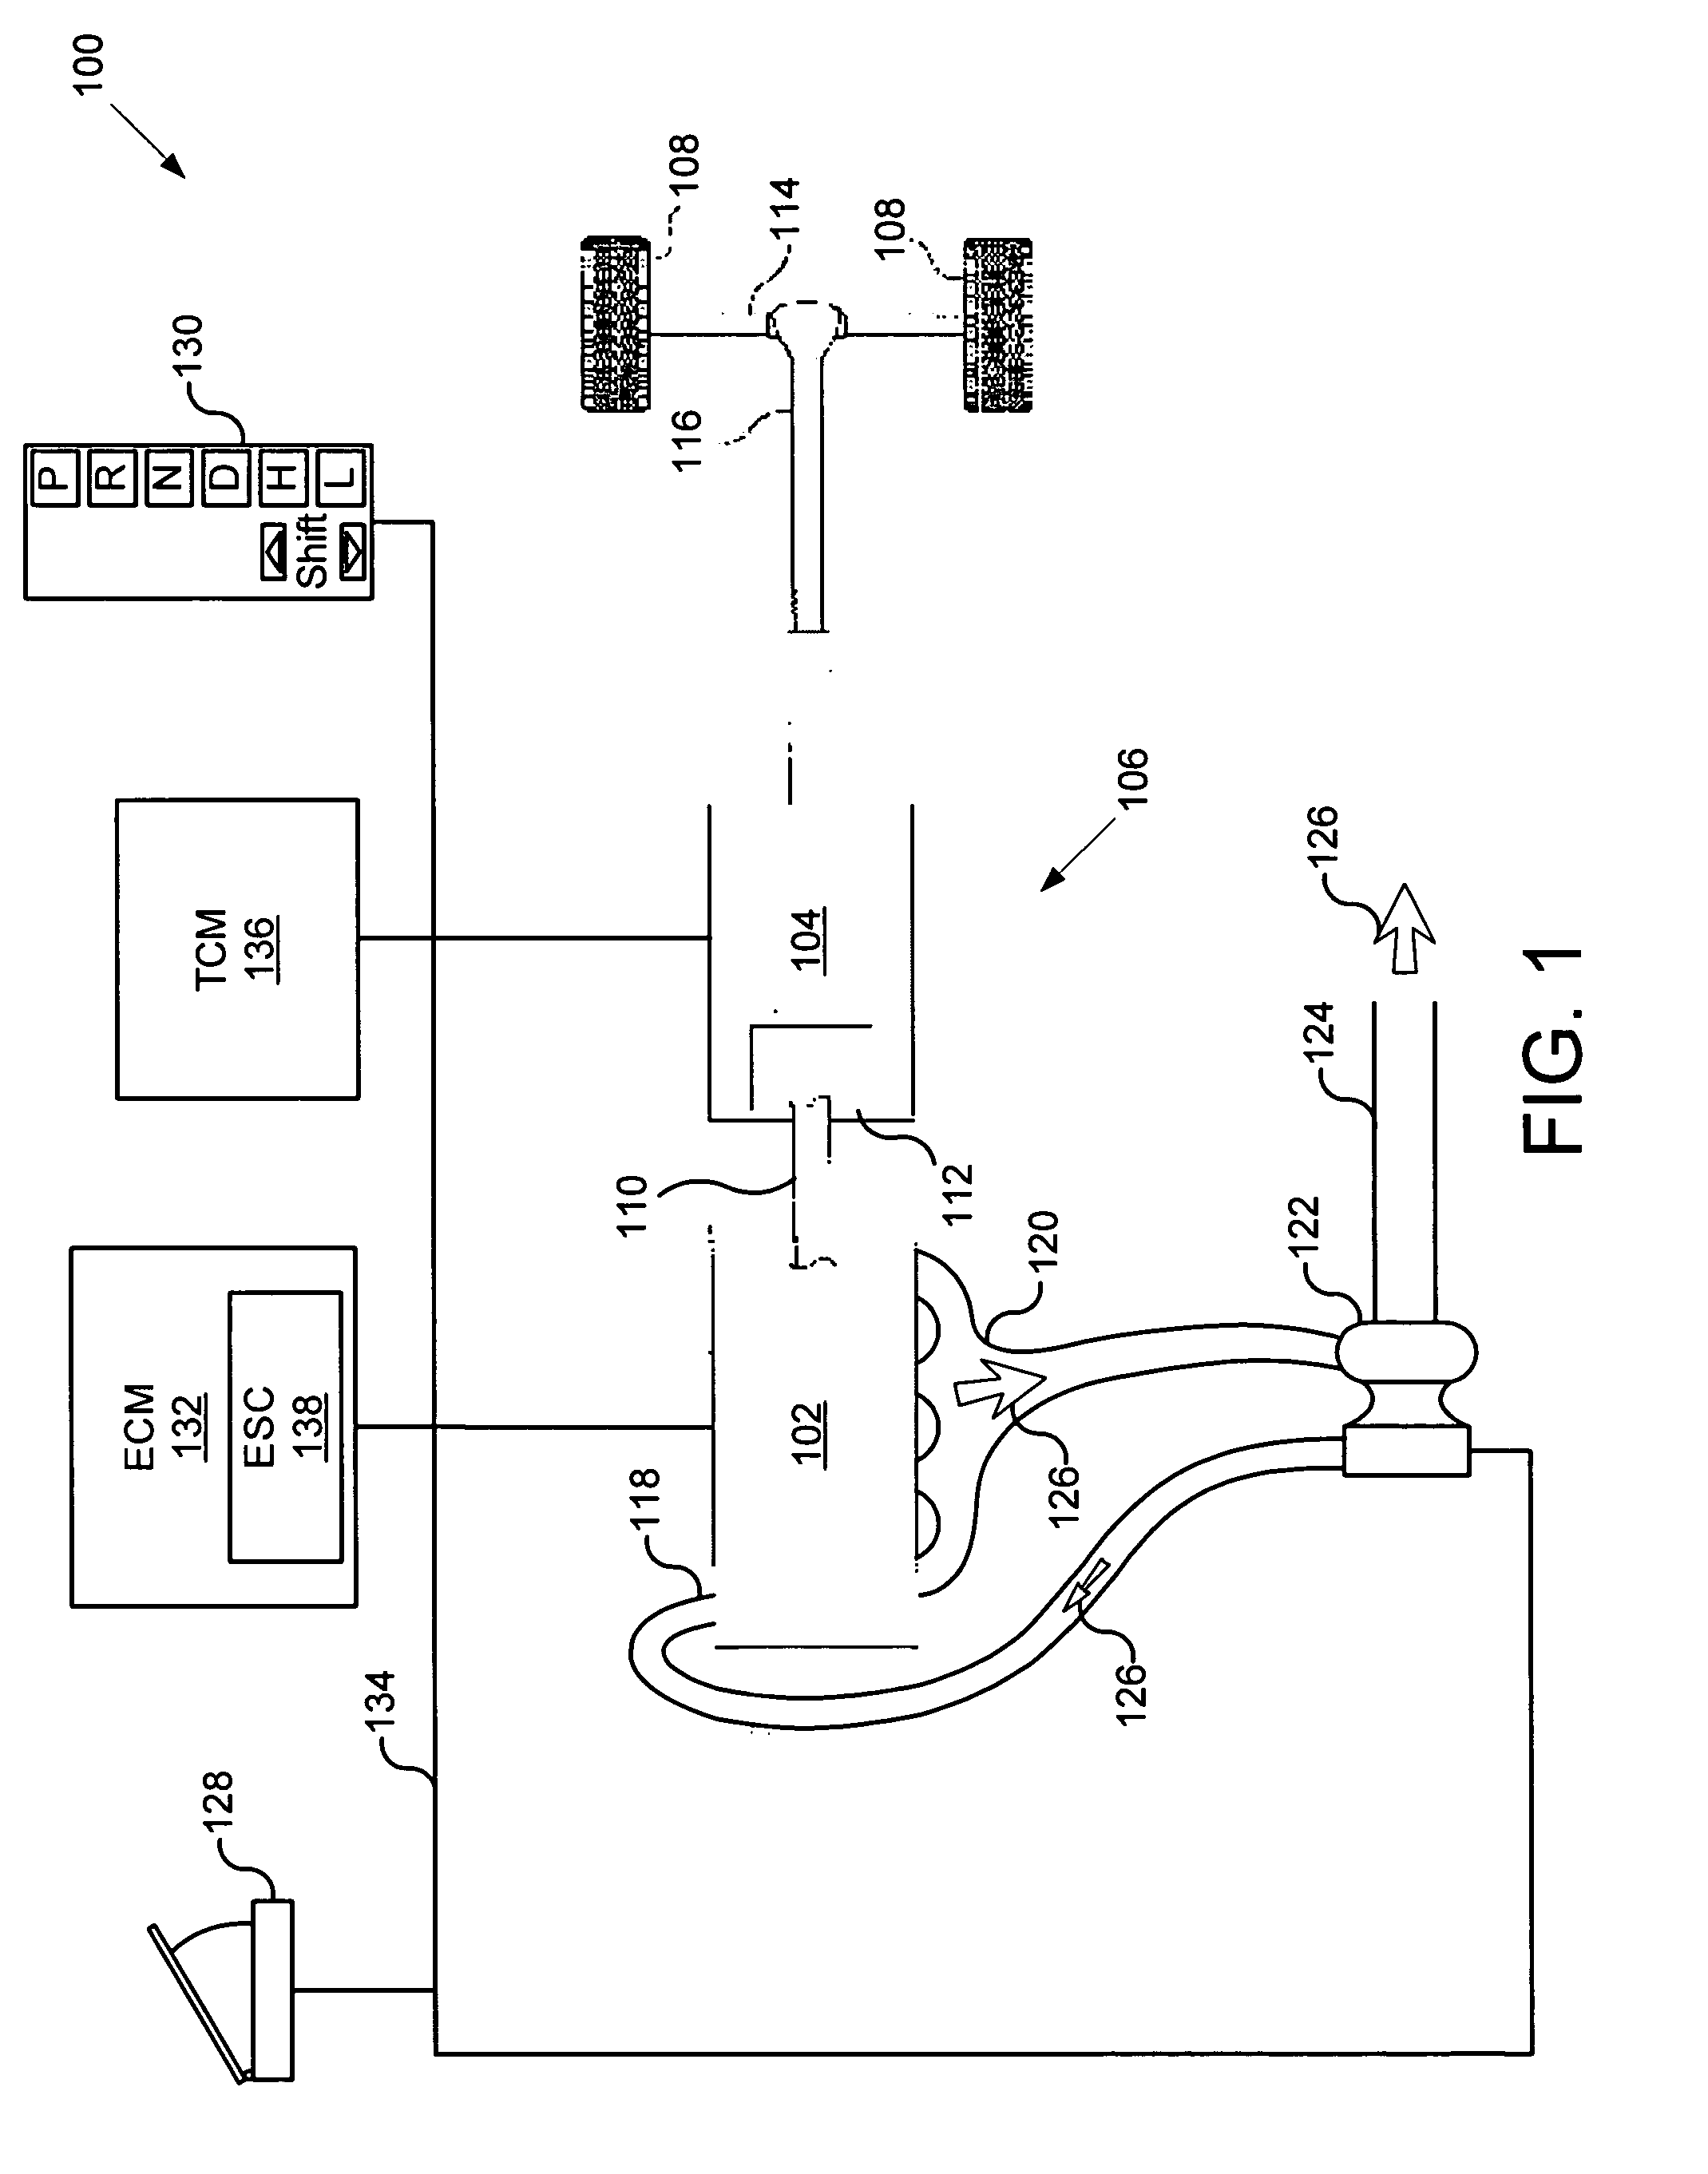 Apparatus, system, and method for improving the rate of deceleration of an engine